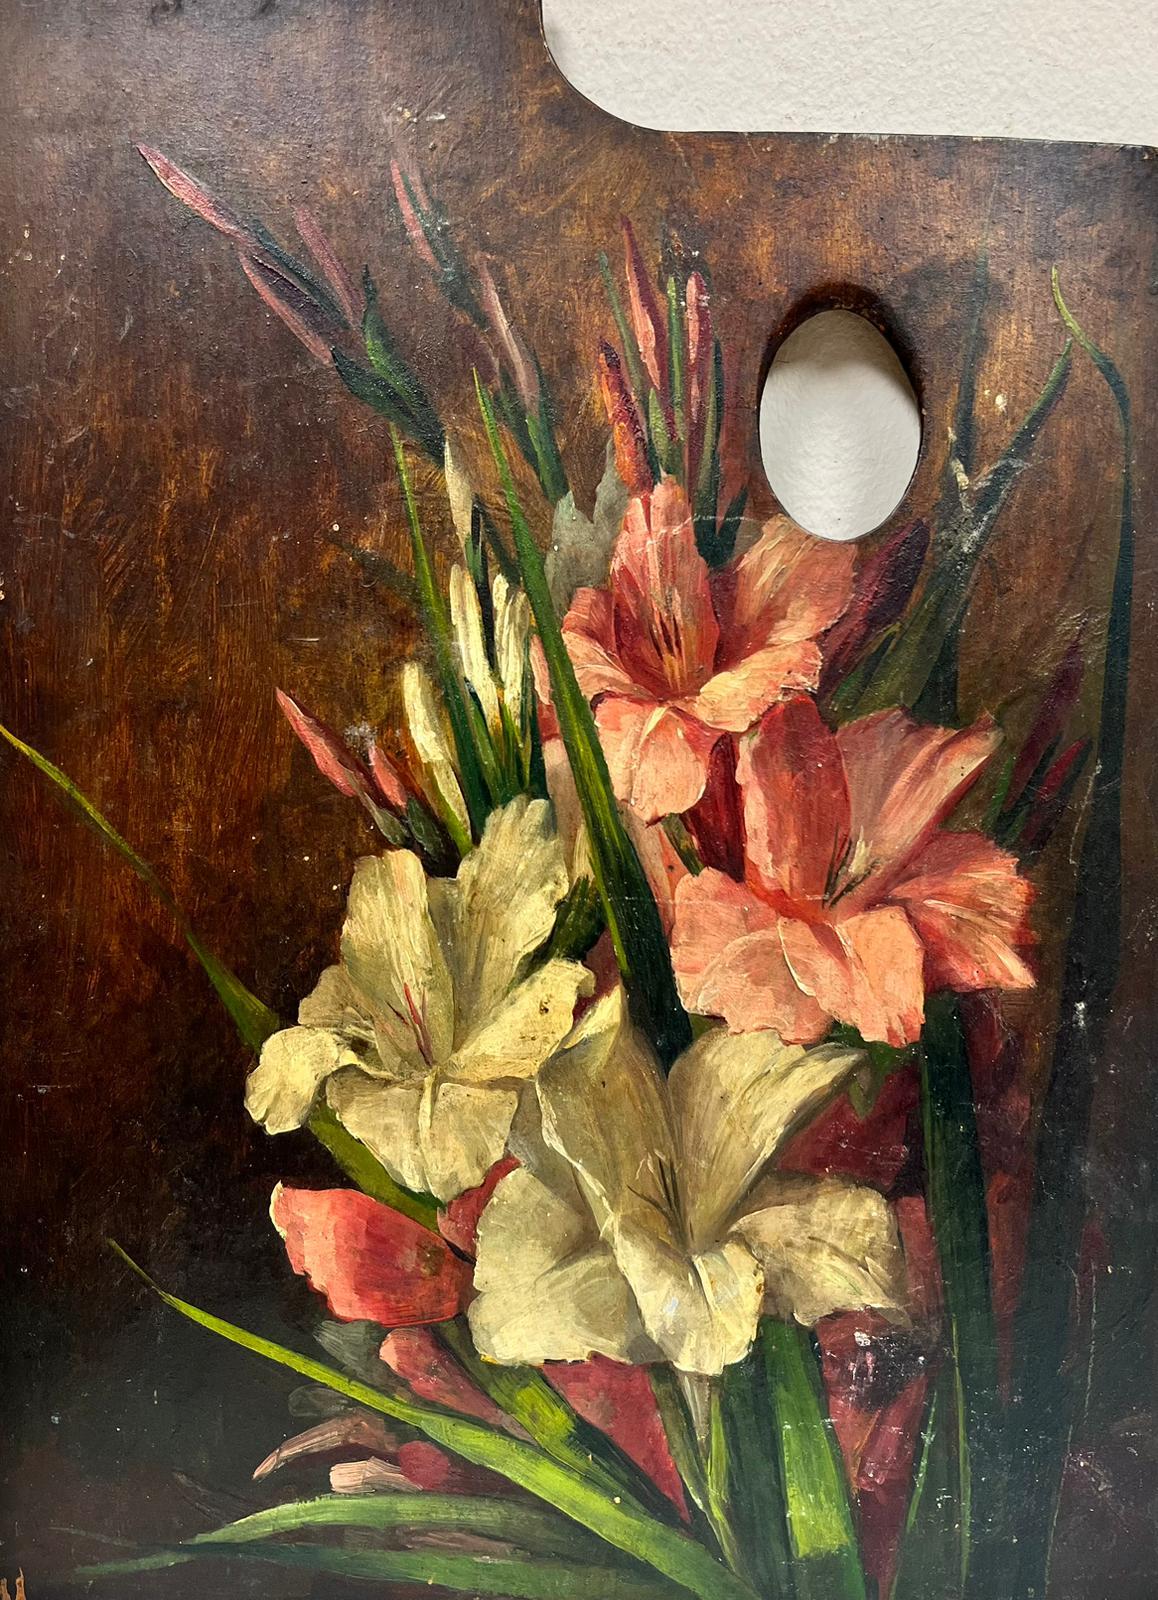 Antique French Artists Wooden Palette painted with Flowers Still Life - Impressionist Painting by French School